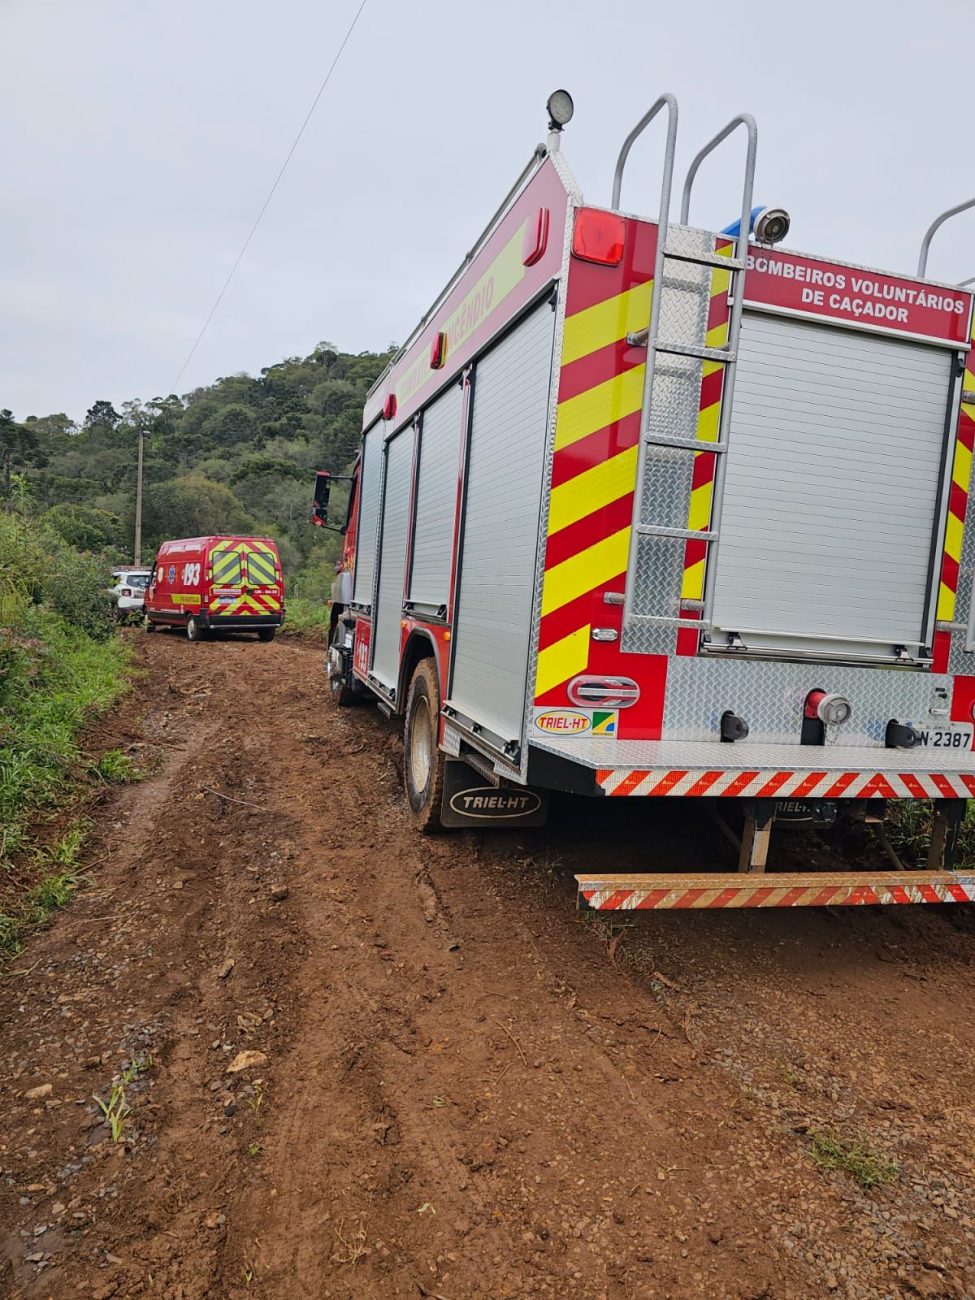 The corporation's ambulance, located at the Tacuara Verde garrison post, carried out its first battles with fire extinguishers before the arrival of the fire department, where it consumed another 200 liters of water.  - Military Fire Department/Reproduction/ND